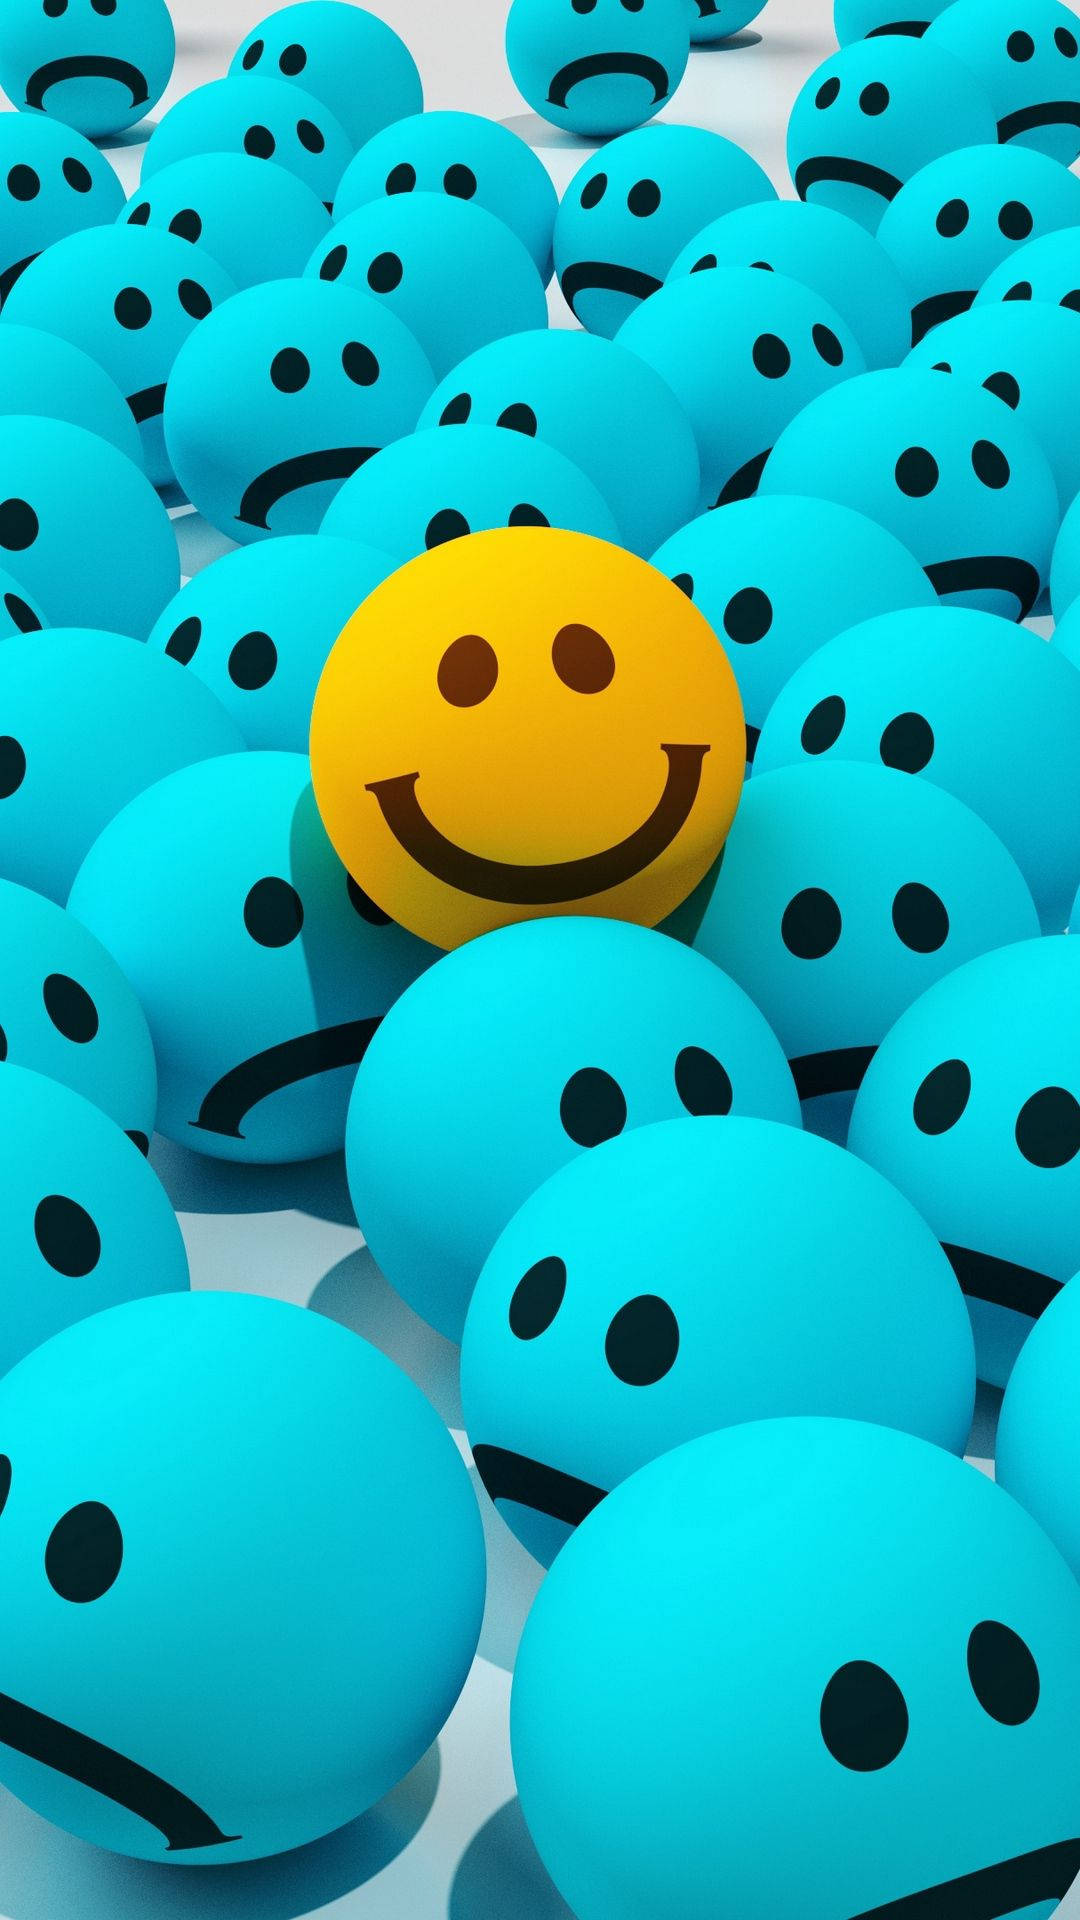 Smiley Face With Sad Face Balls Background